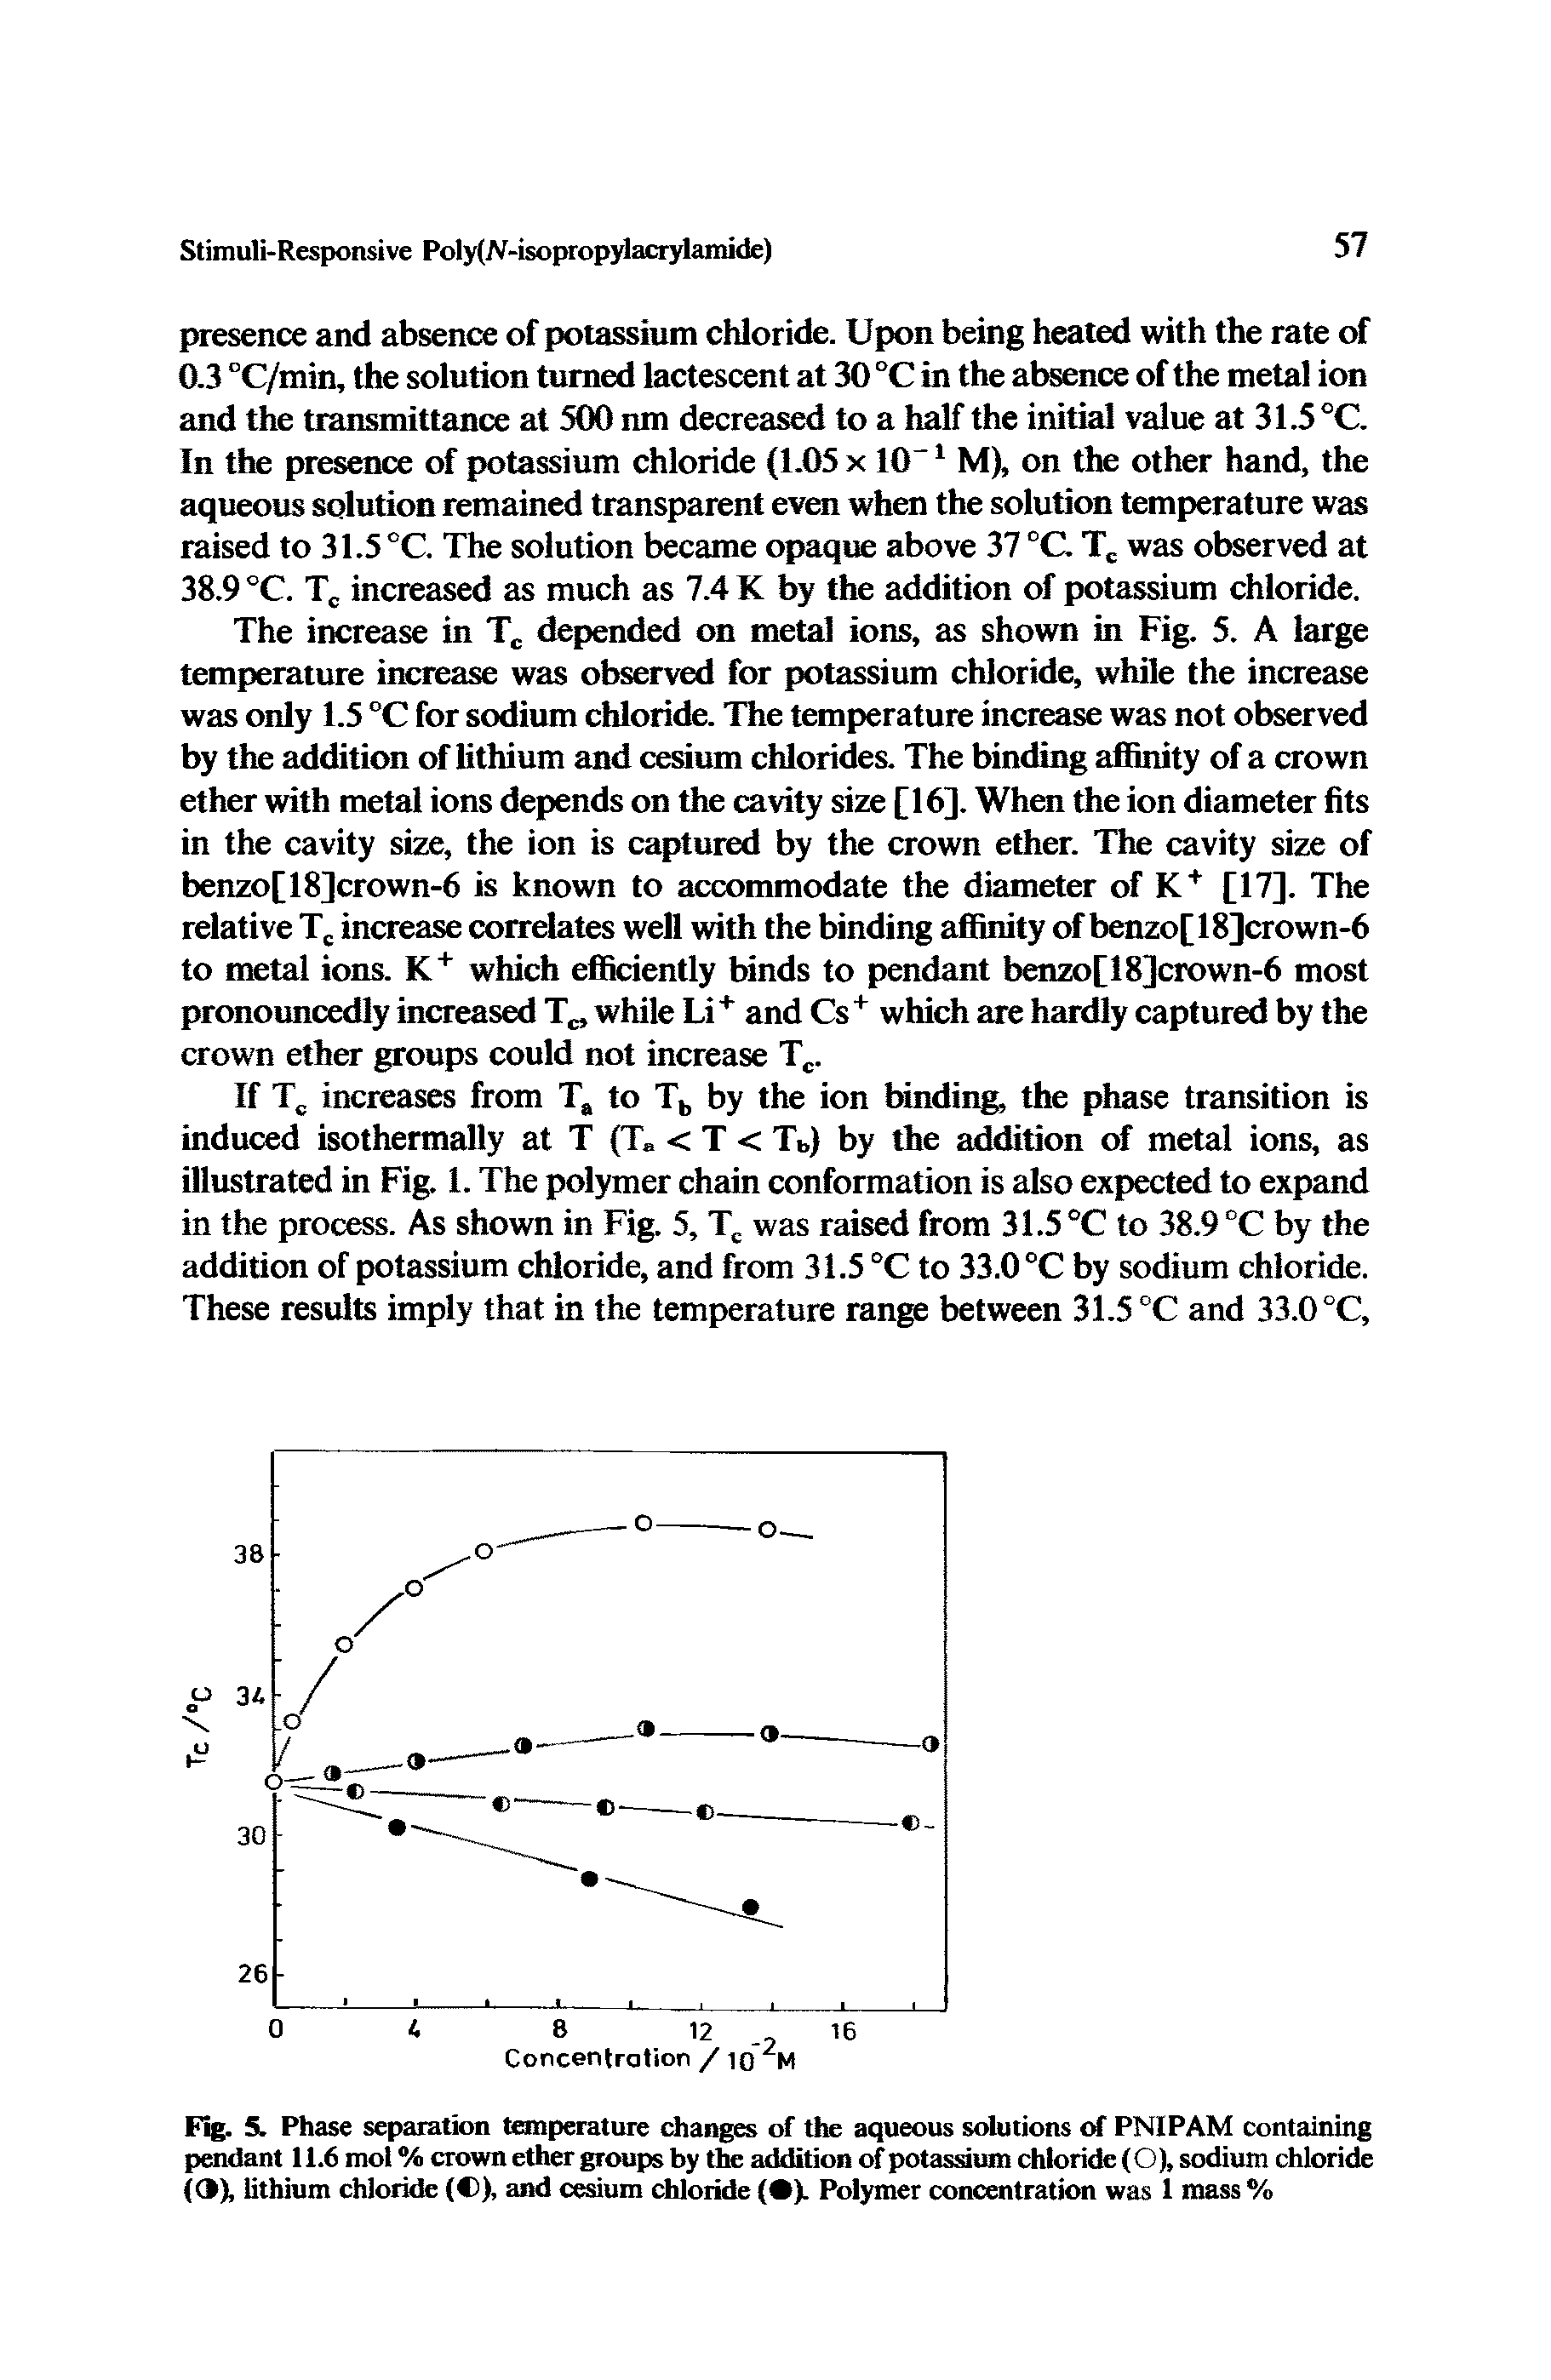 Fig. 5. Phase separation temperature changes of the aqueous solutions of PNIPAM containing pendant 11.6 mol % crown ether groups by the addition of potassium chloride (O), sodium chloride (3), lithium chloride (C), and cesium chloride ( ). Polymer concentration was 1 mass %...